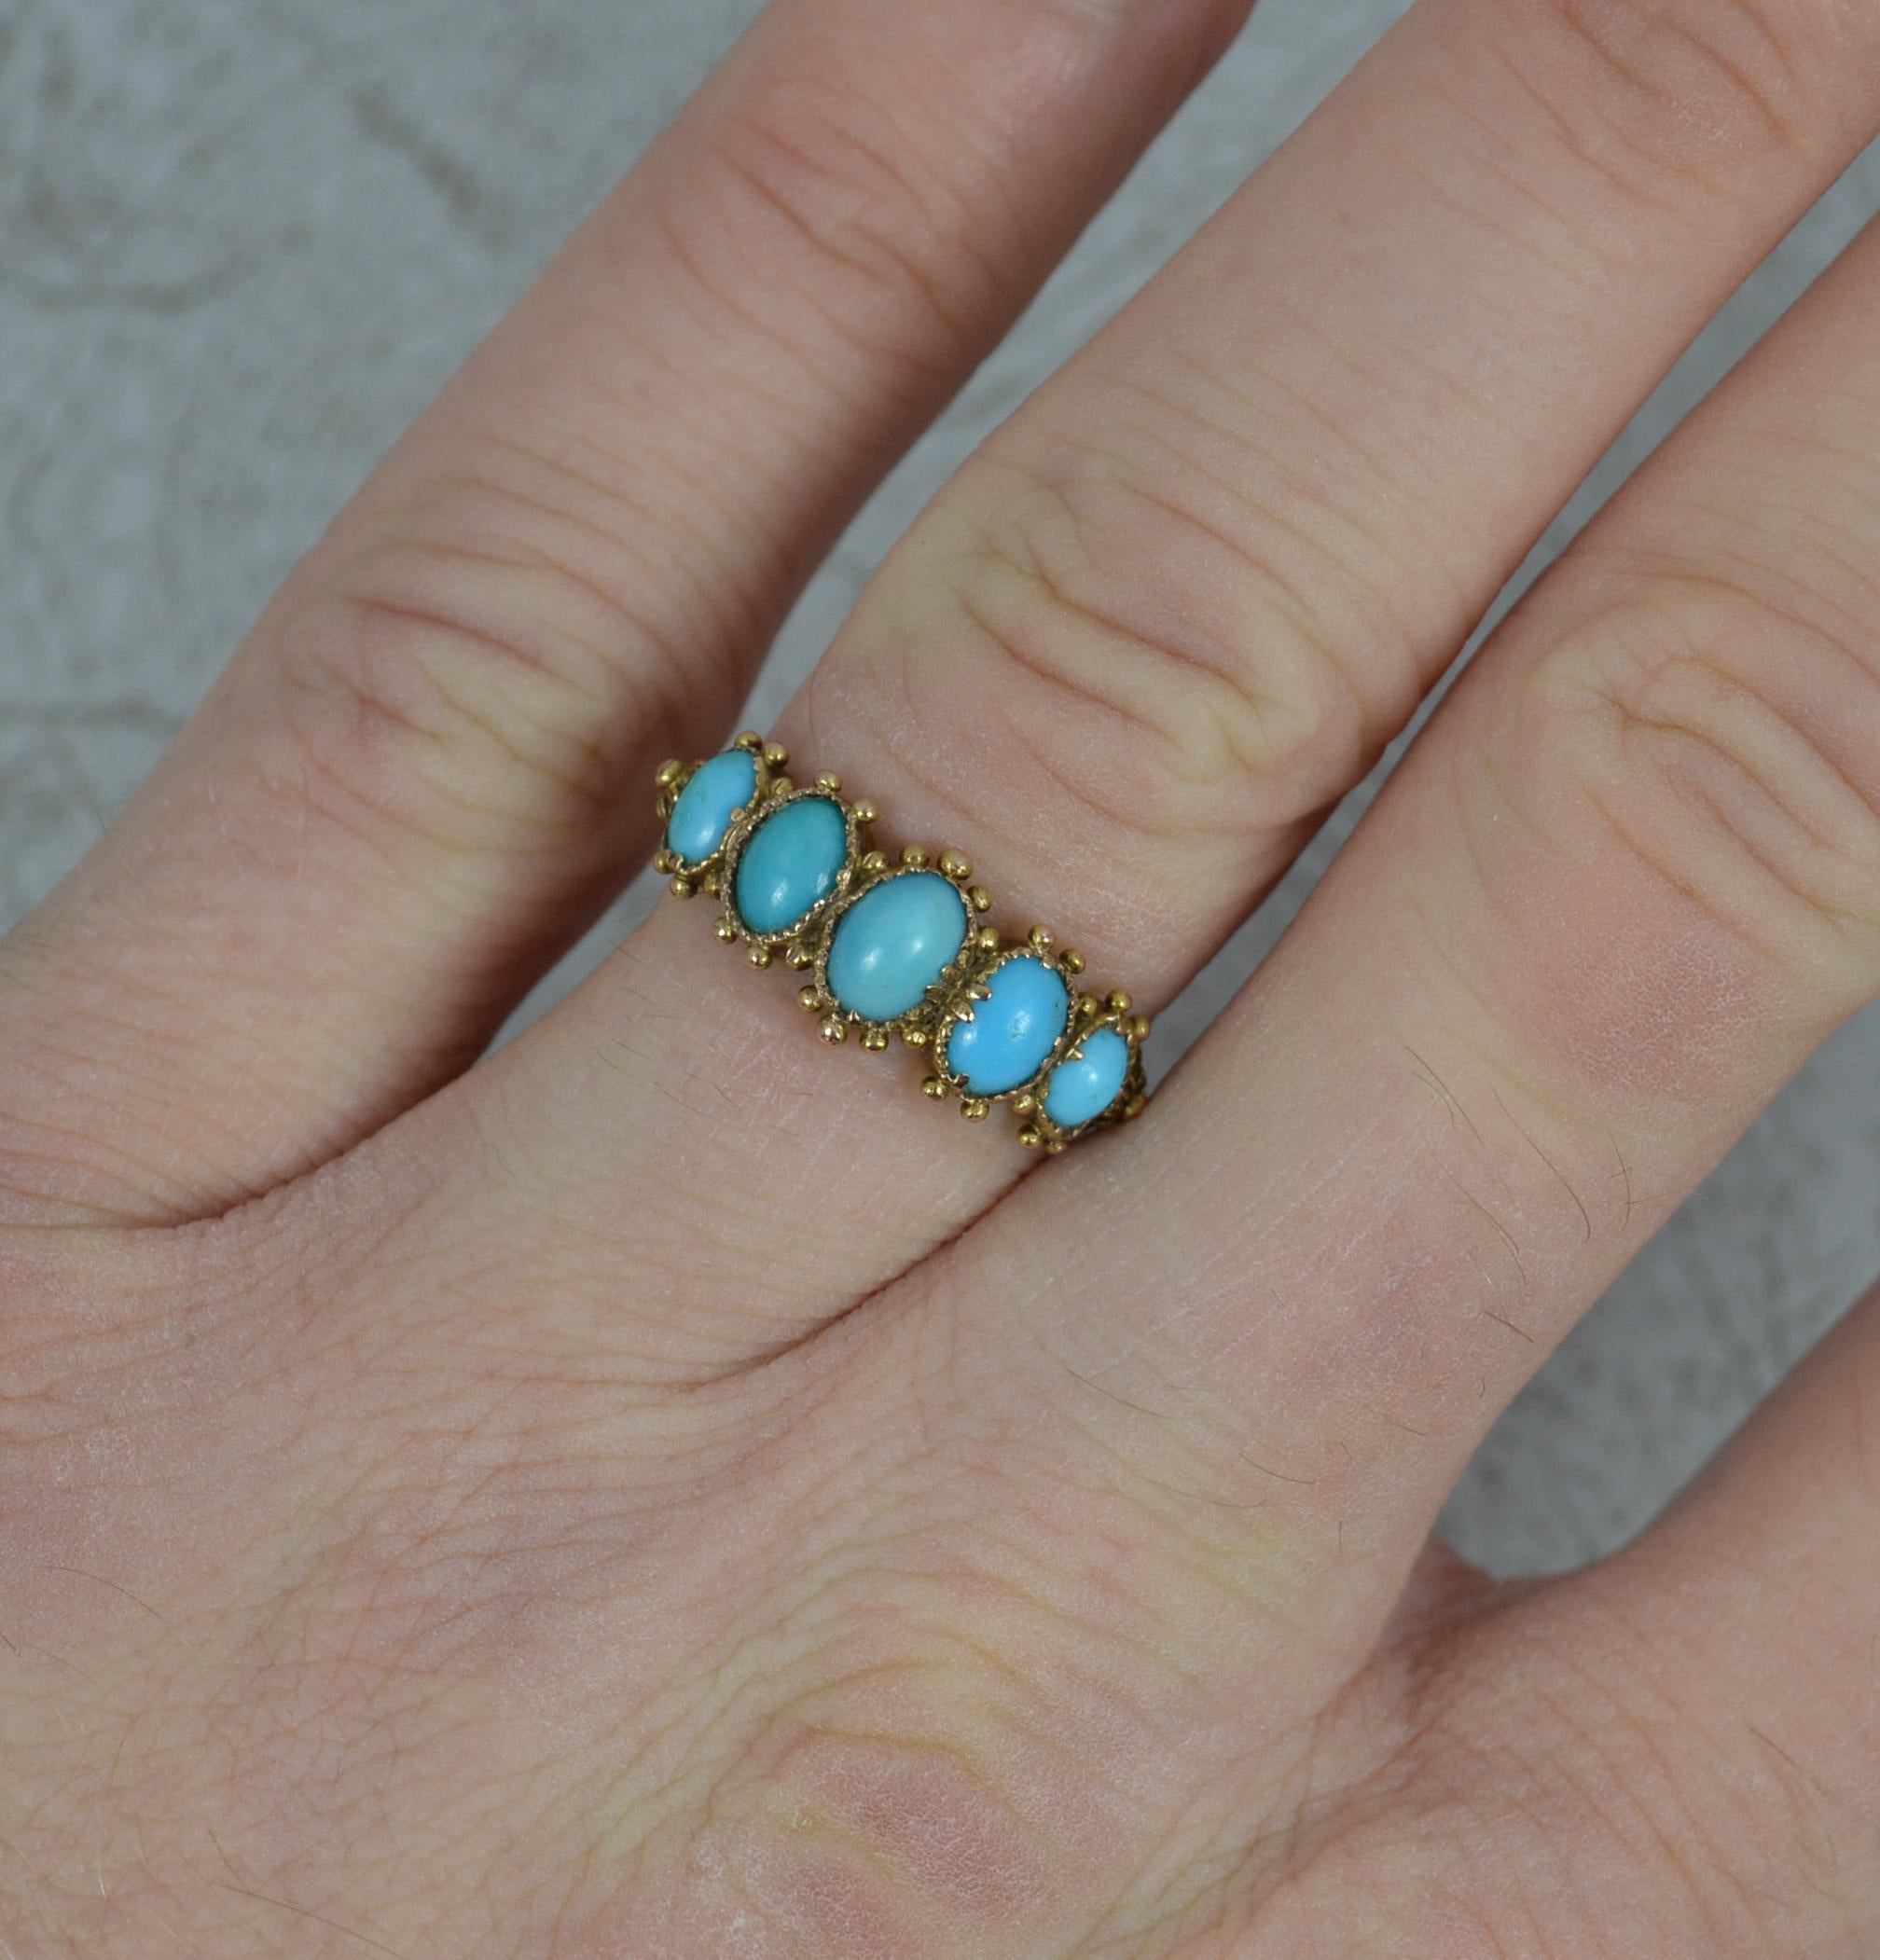 A superb Georgian period ring. Circa 1810.
Solid 15 carat yellow gold example.
Designed with five natural turquoise stones. Each of an oval shape. Fine bezel setting with gold beads surrounding and a very fine pattern to the band